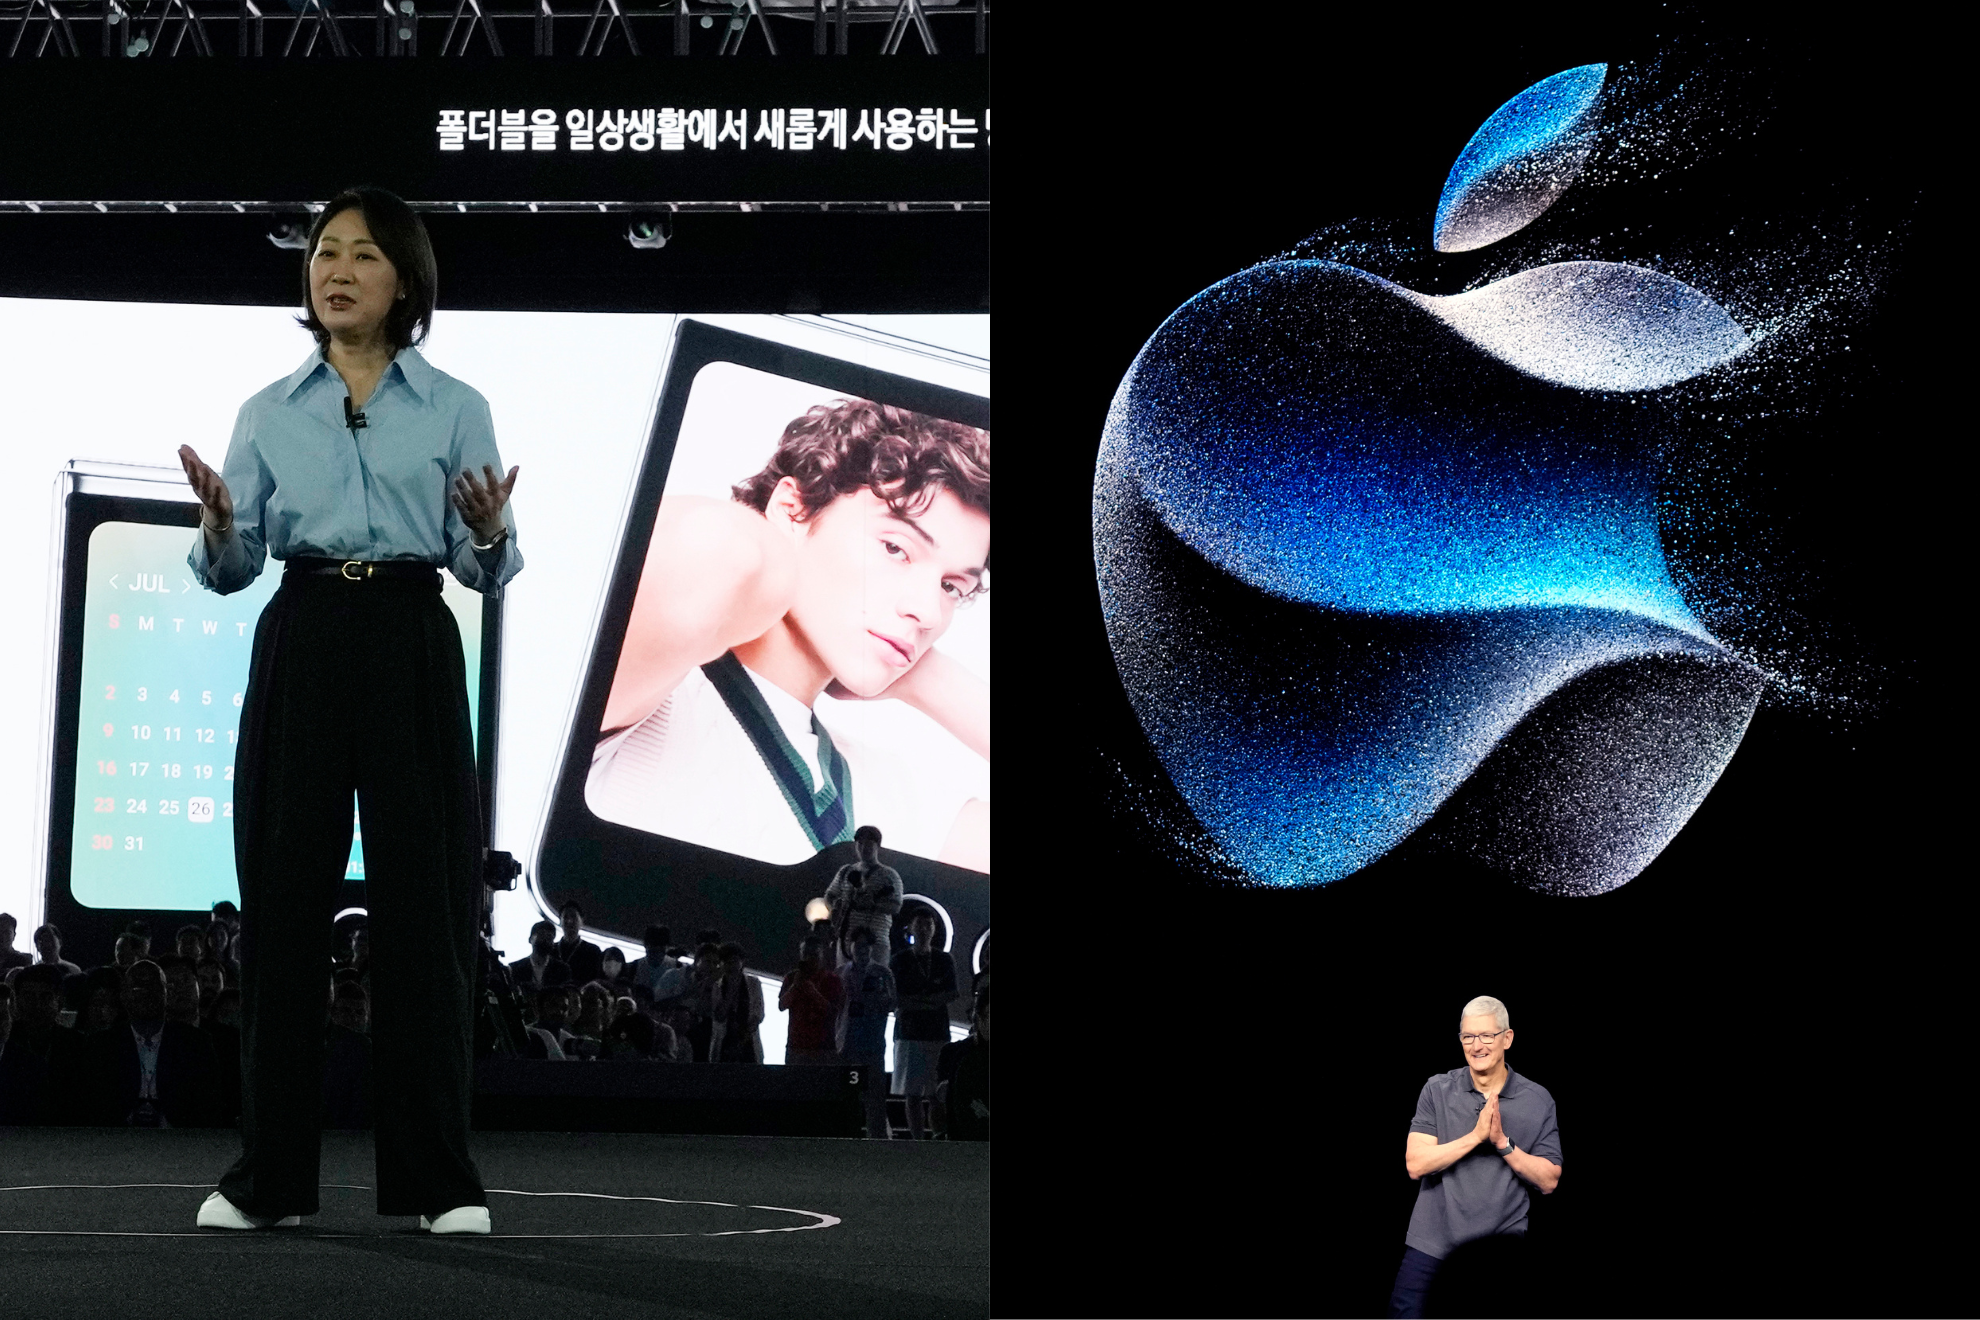 Samsung and Apple's rivalry continues.